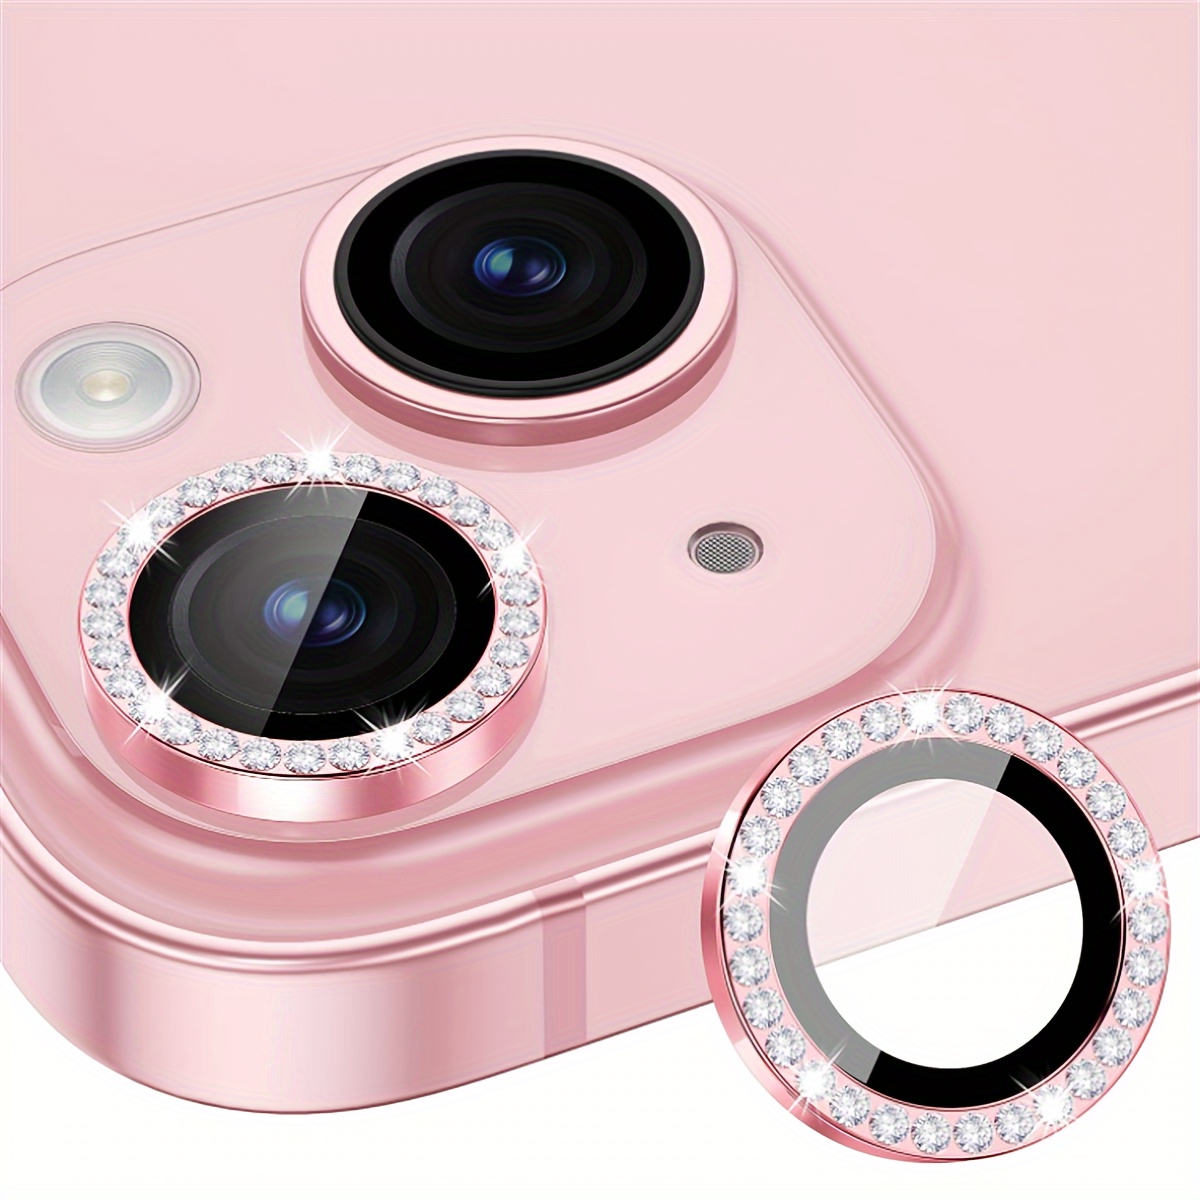 Metal Camera Lens Protector for iPhone 15 14 Pro Max Tempered Glass Metal  Ring On iPhone 15 plus 13 12 11 Back Lens Cover Film